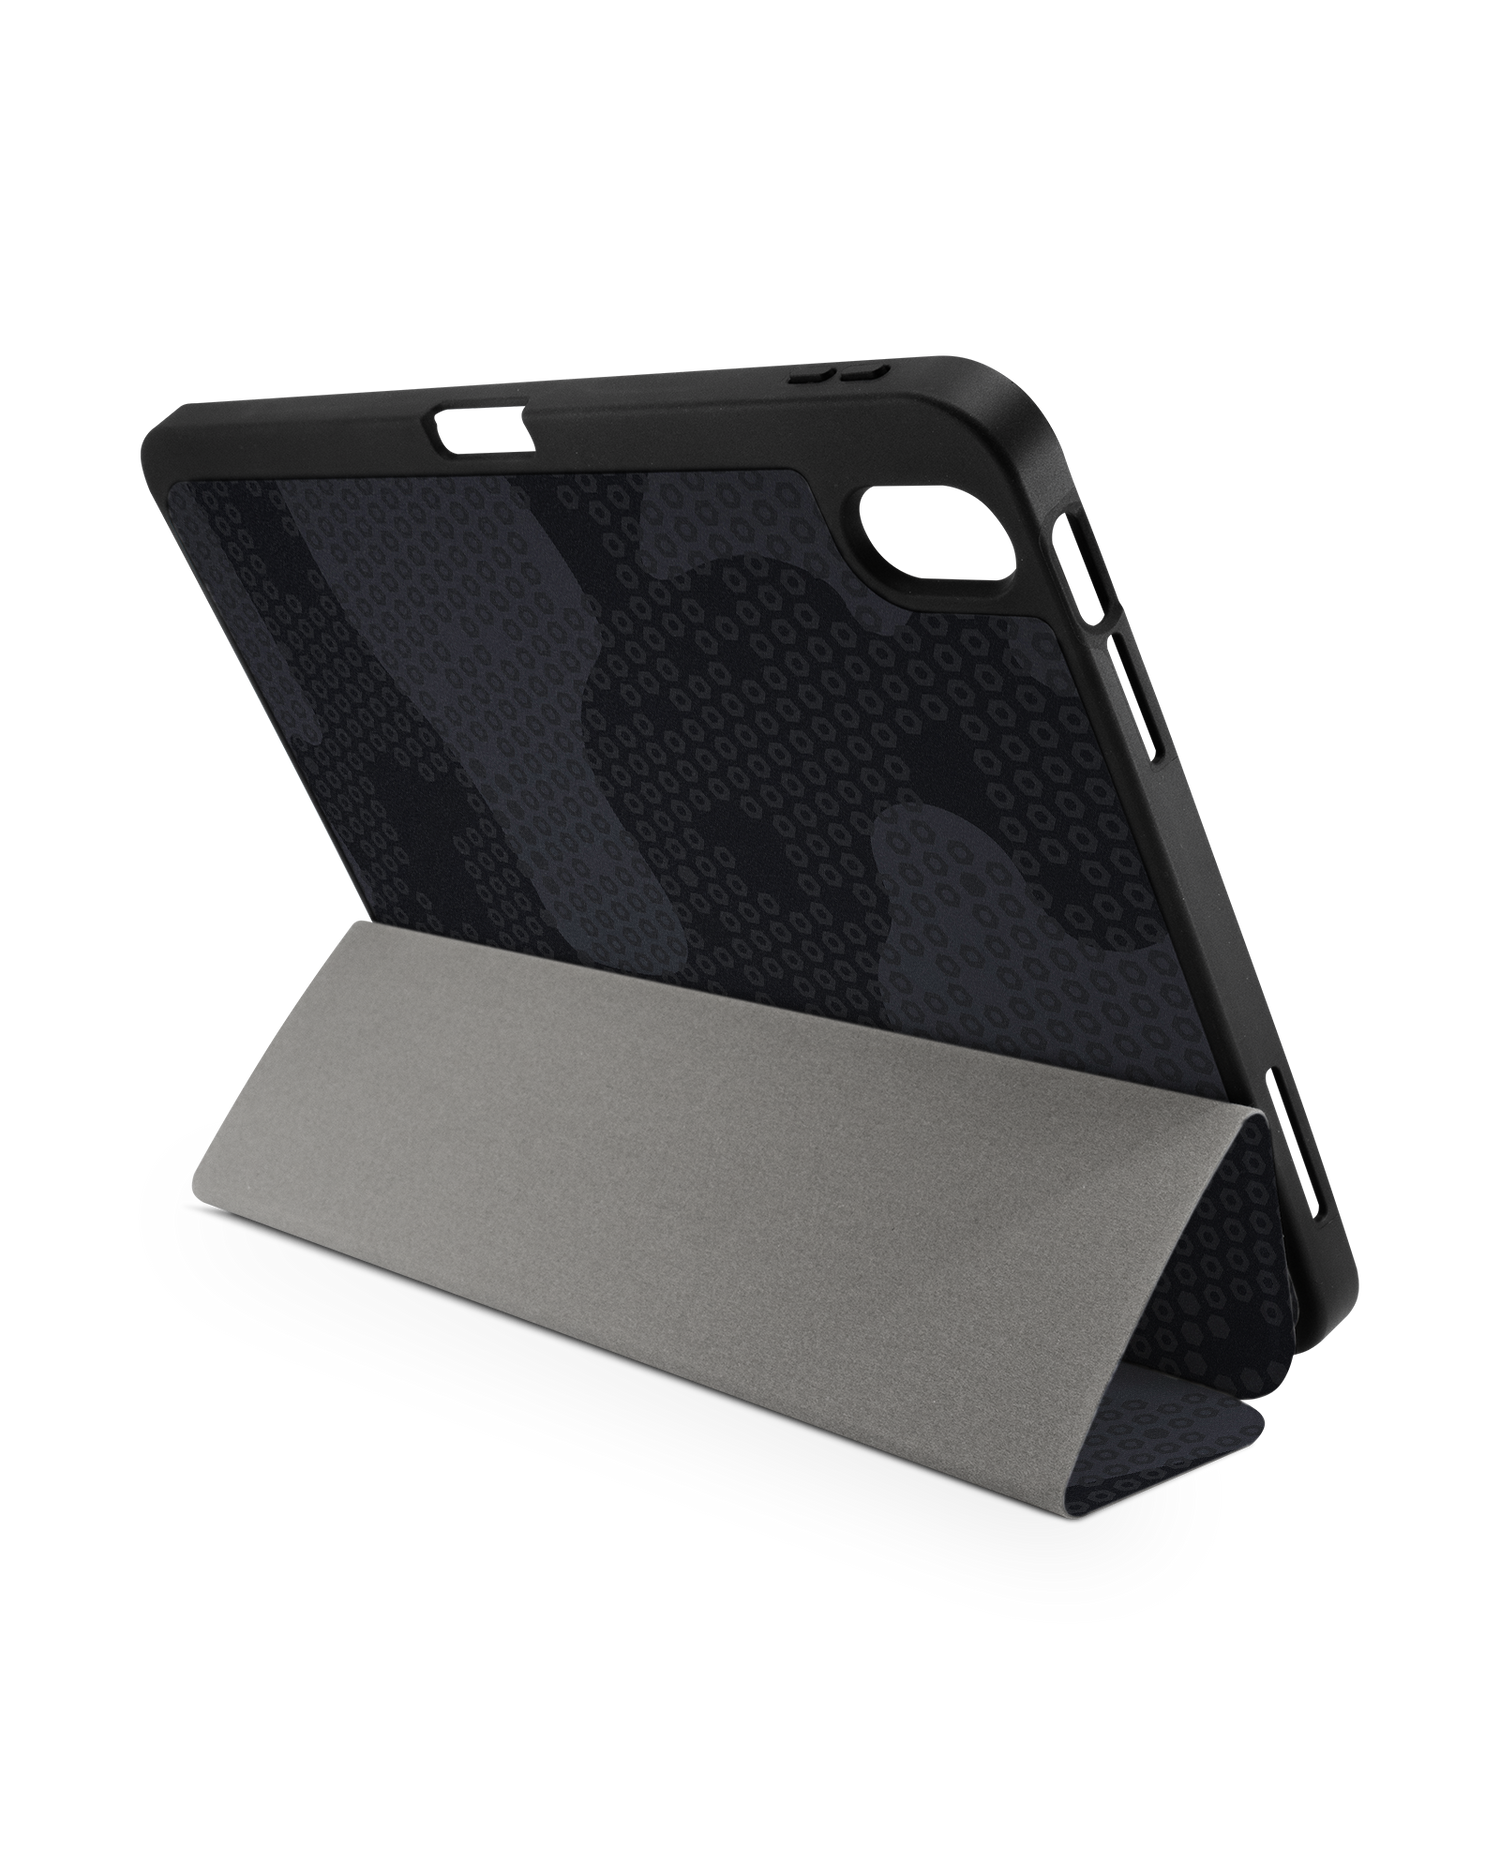 Spec Ops Dark iPad Case with Pencil Holder for Apple iPad (10th Generation): Set up in landscape format (back view)